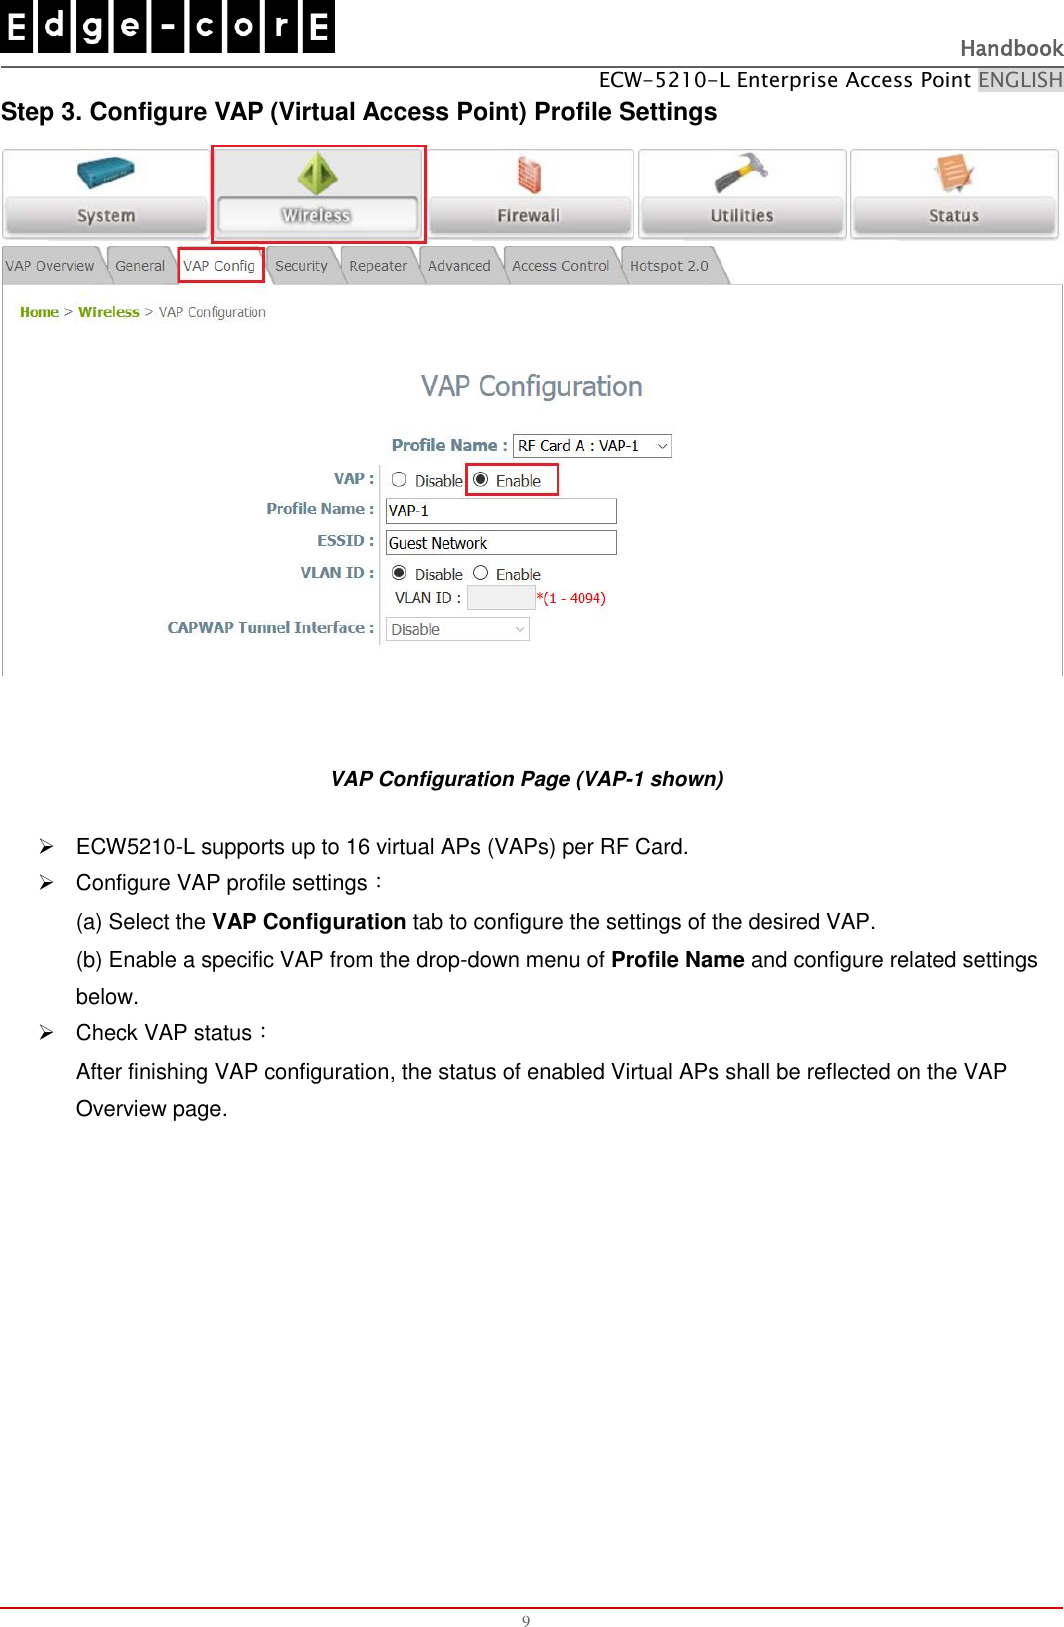   Handbook ECW-5210-L Enterprise Access Point ENGLISH  9 Step 3. Configure VAP (Virtual Access Point) Profile Settings   VAP Configuration Page (VAP-1 shown)   ECW5210-L supports up to 16 virtual APs (VAPs) per RF Card.     Configure VAP profile settings： (a) Select the VAP Configuration tab to configure the settings of the desired VAP.   (b) Enable a specific VAP from the drop-down menu of Profile Name and configure related settings below.   Check VAP status： After finishing VAP configuration, the status of enabled Virtual APs shall be reflected on the VAP Overview page.   